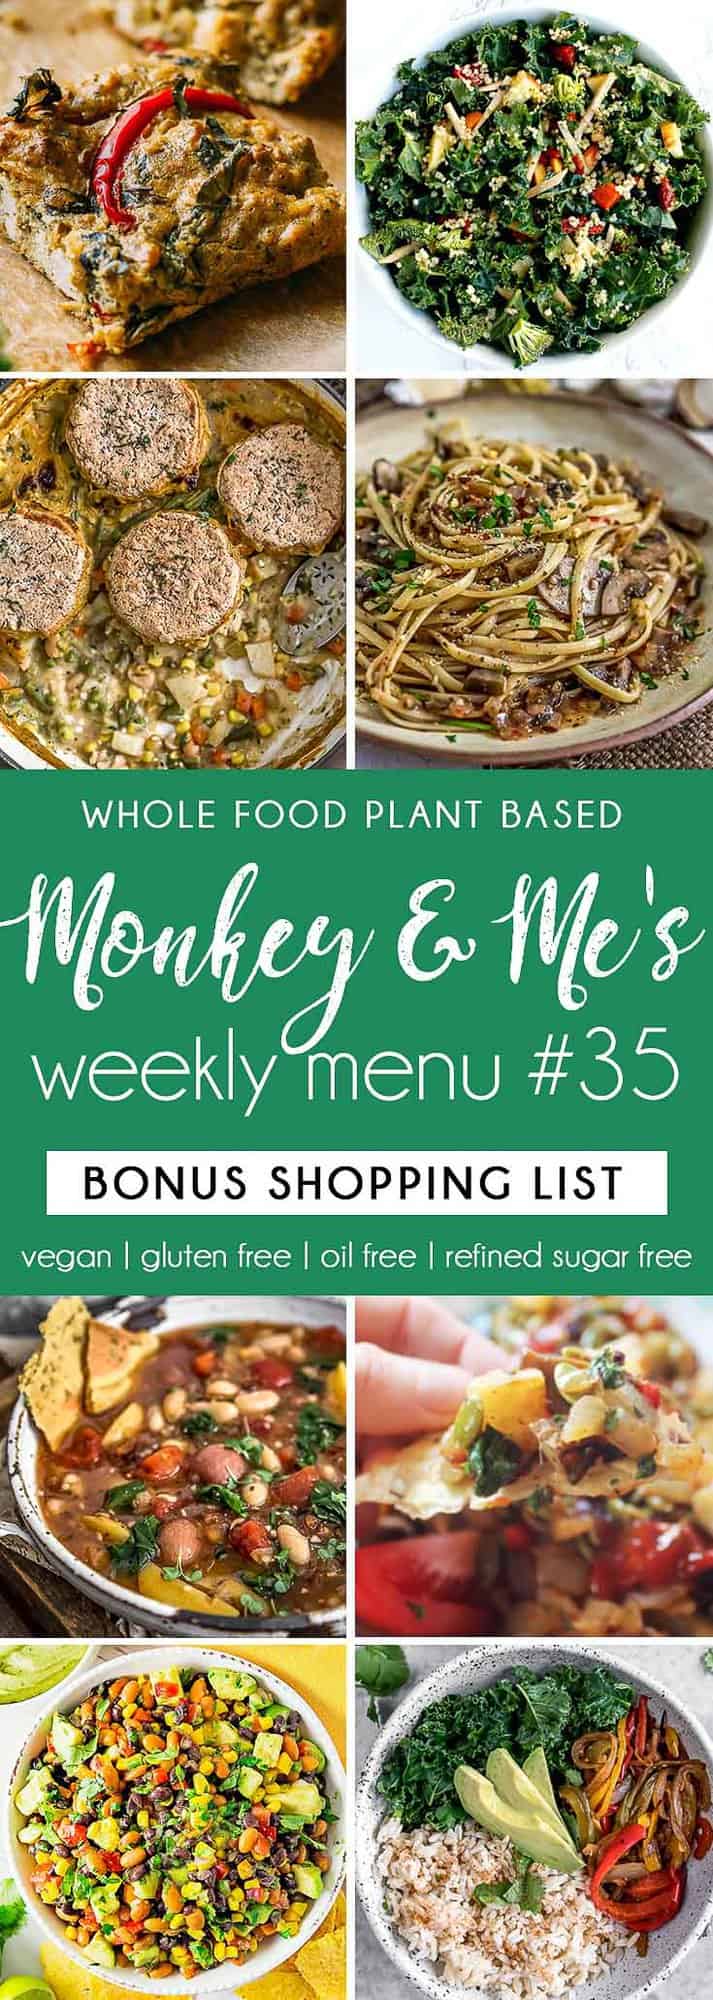 Monkey and Me's Menu 35 featuring 8 recipes